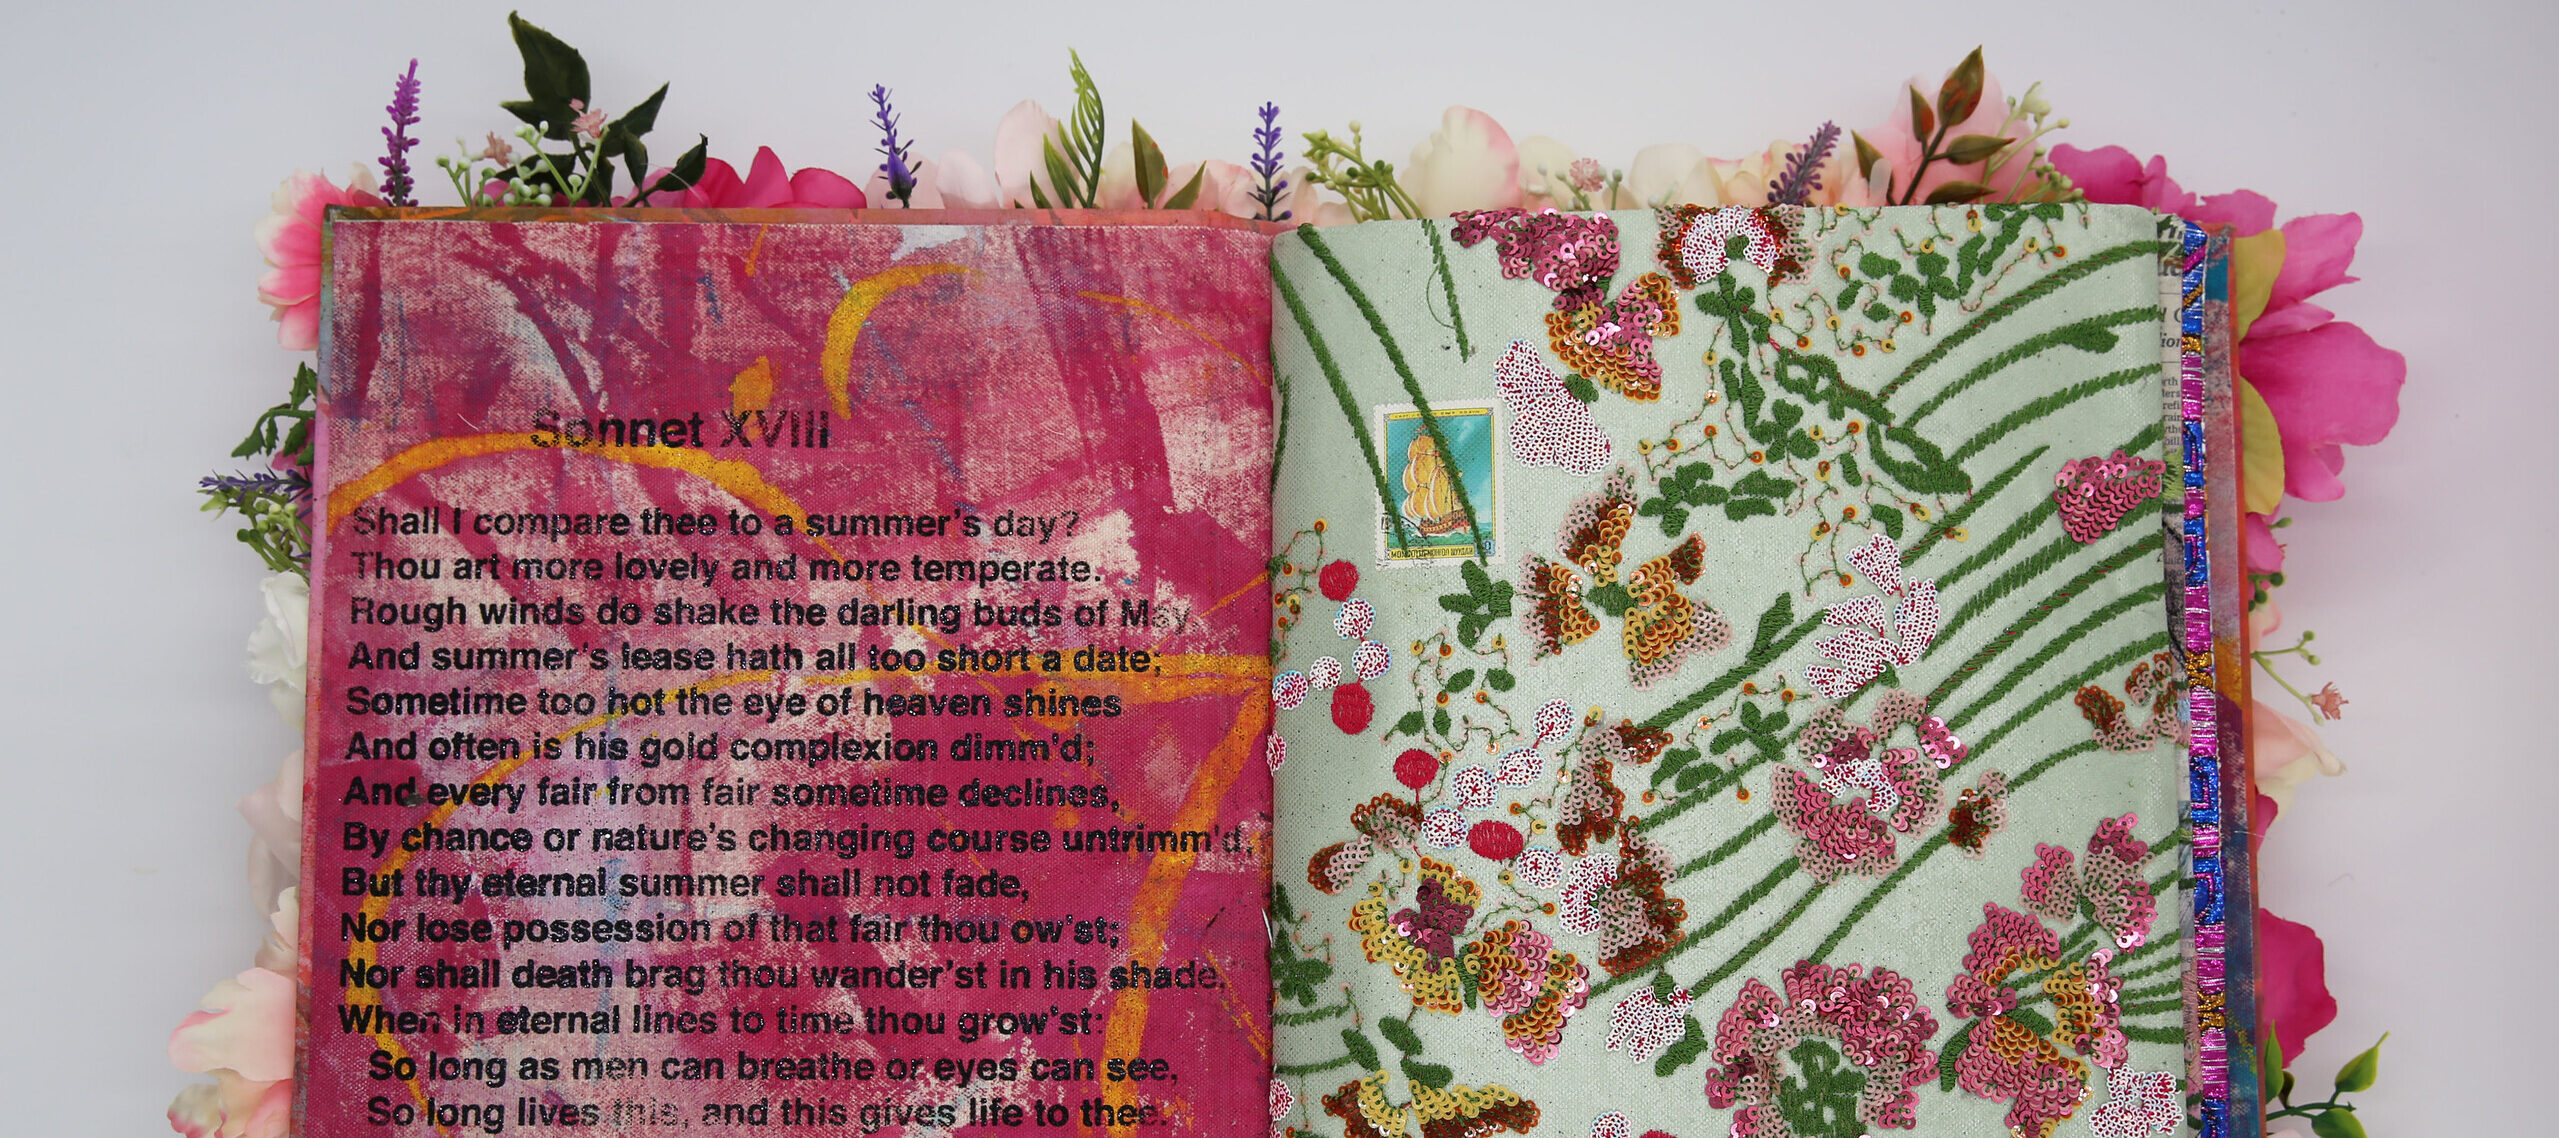 A photo of an artist's book, open in the middle. The left page displays Shakespeare's Sonnet XVII, and is painted in pink and yellow streaks. The right page has embroidered and sequined flowers and leaves.